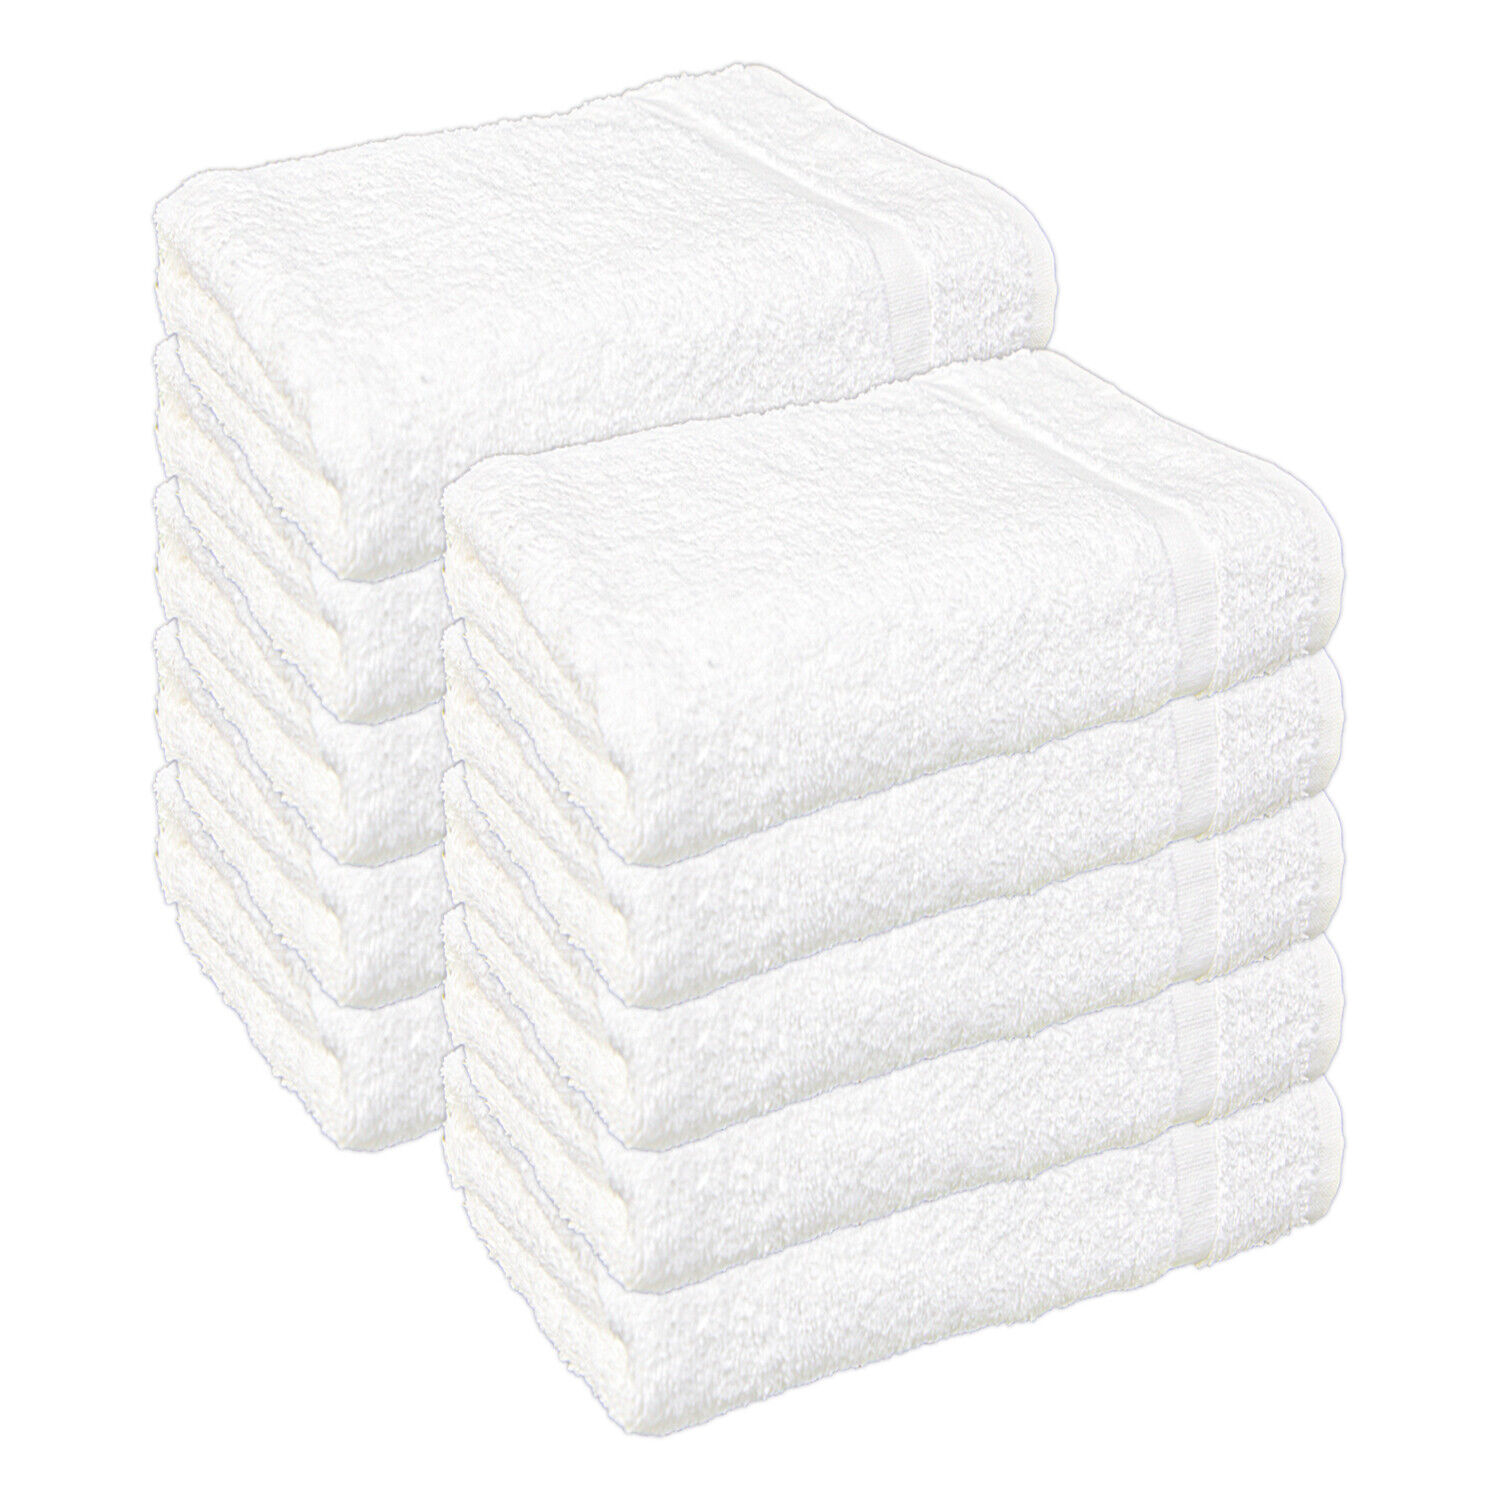 12 Pack of Admiral Bath Towels - White - 24 x 50 - Bulk Bathroom Cotton Towels  Arkwright Does Not Apply